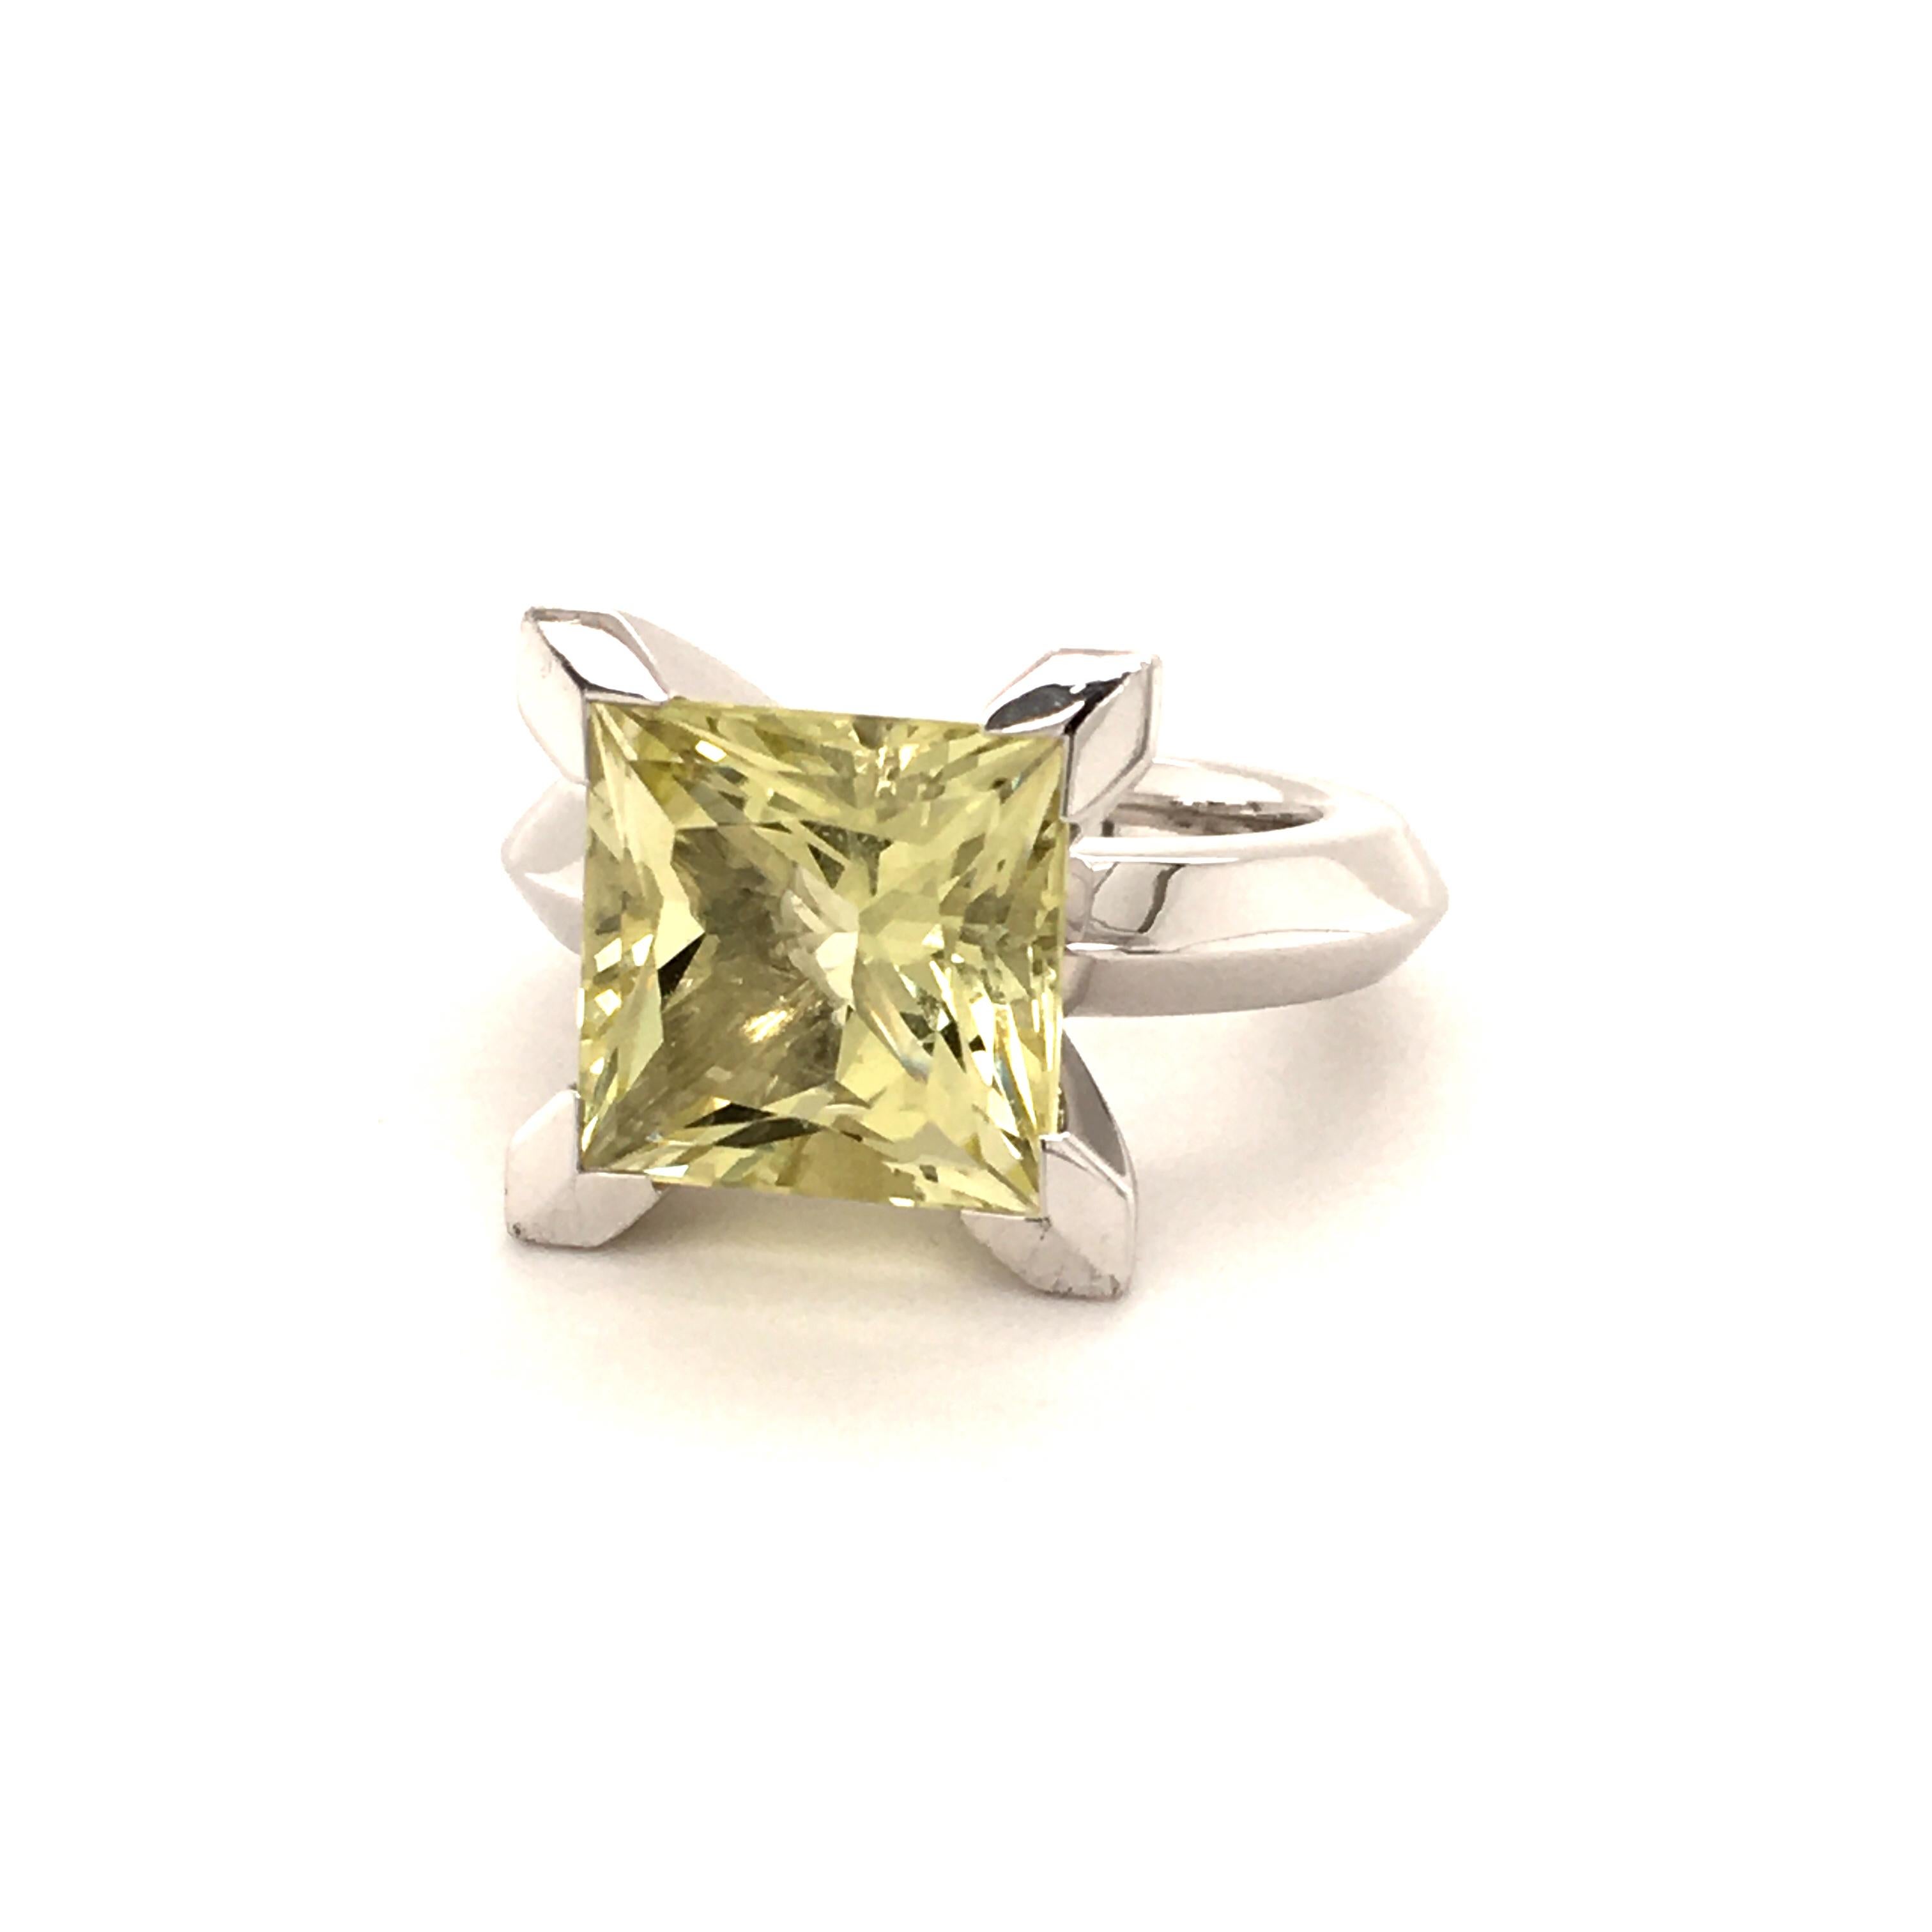 This bulky ring in 18 Kt white gold manufactured by Swiss Jeweller Gubelin convinces with its bold and extreme design. The light colored 7.80 princess cut lemon quartz is securely set in four arrow shaped prongs. The ring weighs an astonishing 22.01